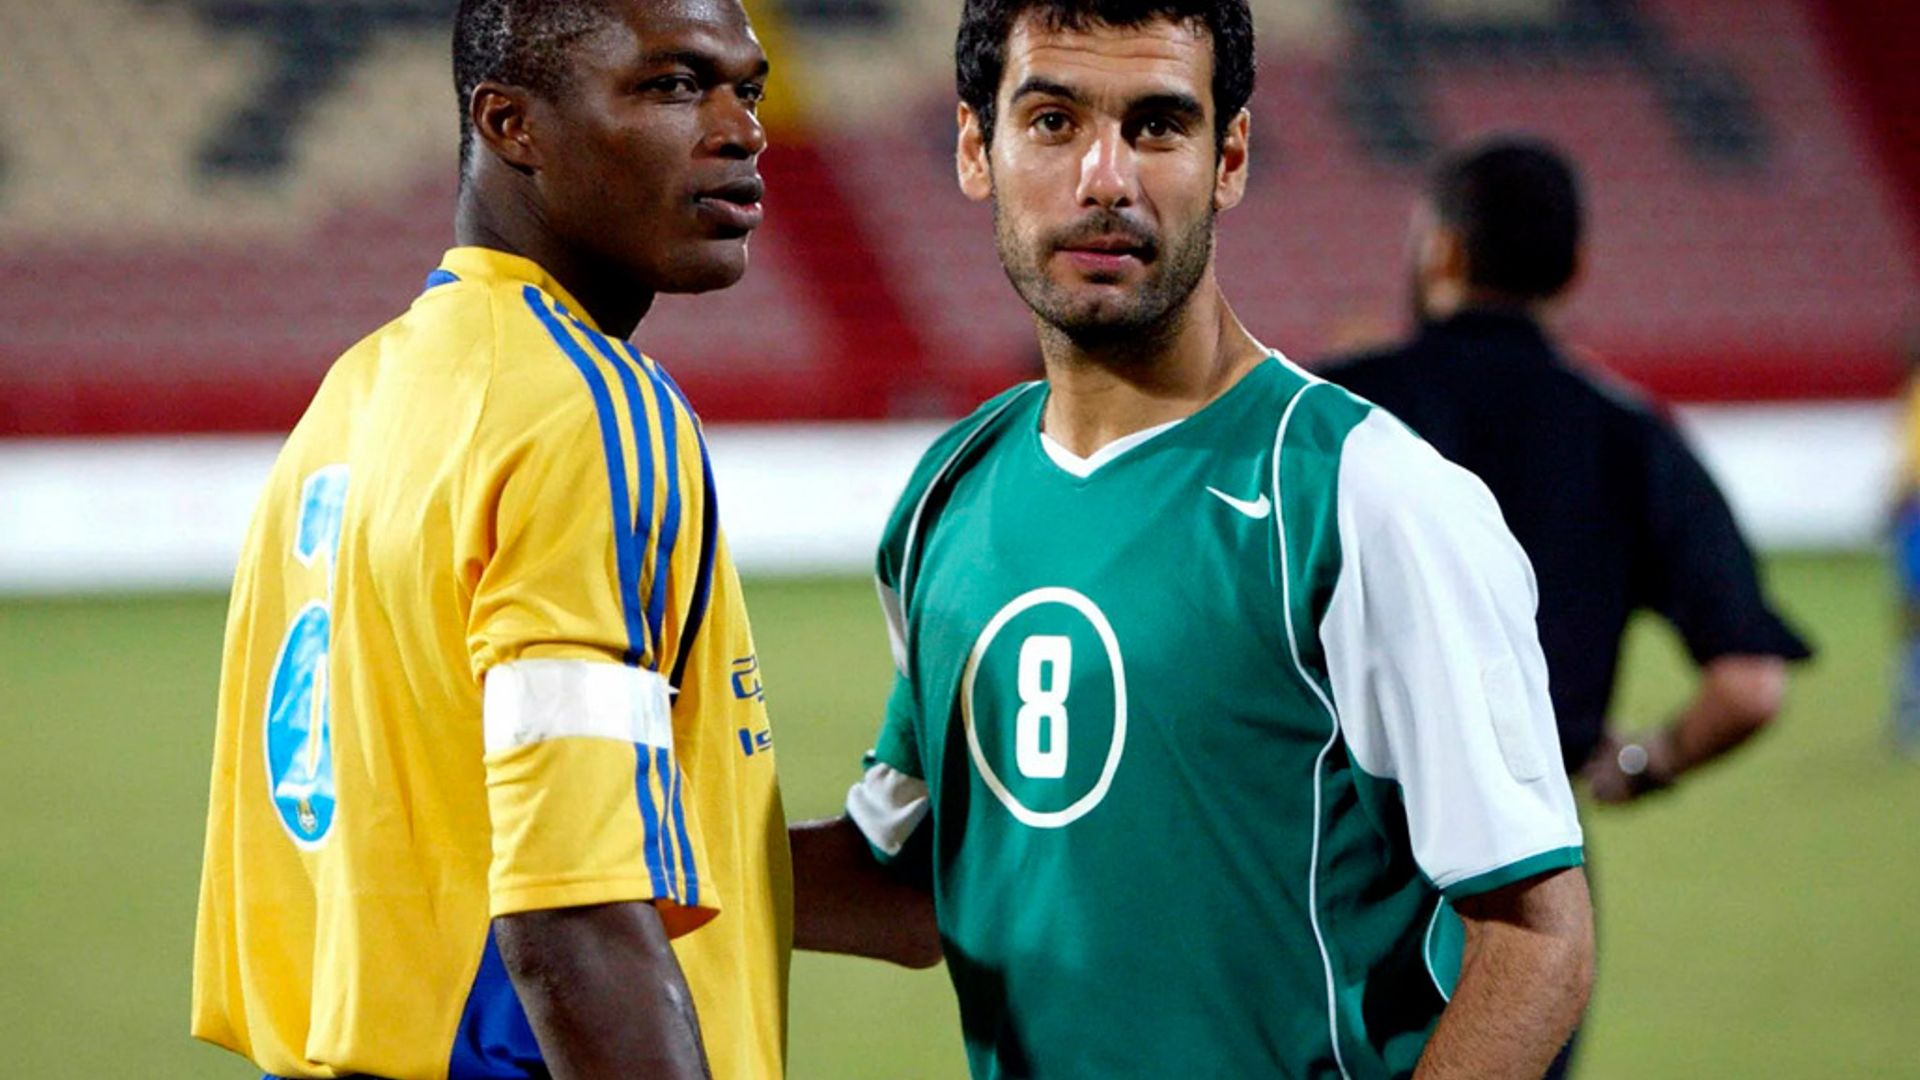 Towards the end of his playing career, Guardiola was with Al-Ahli